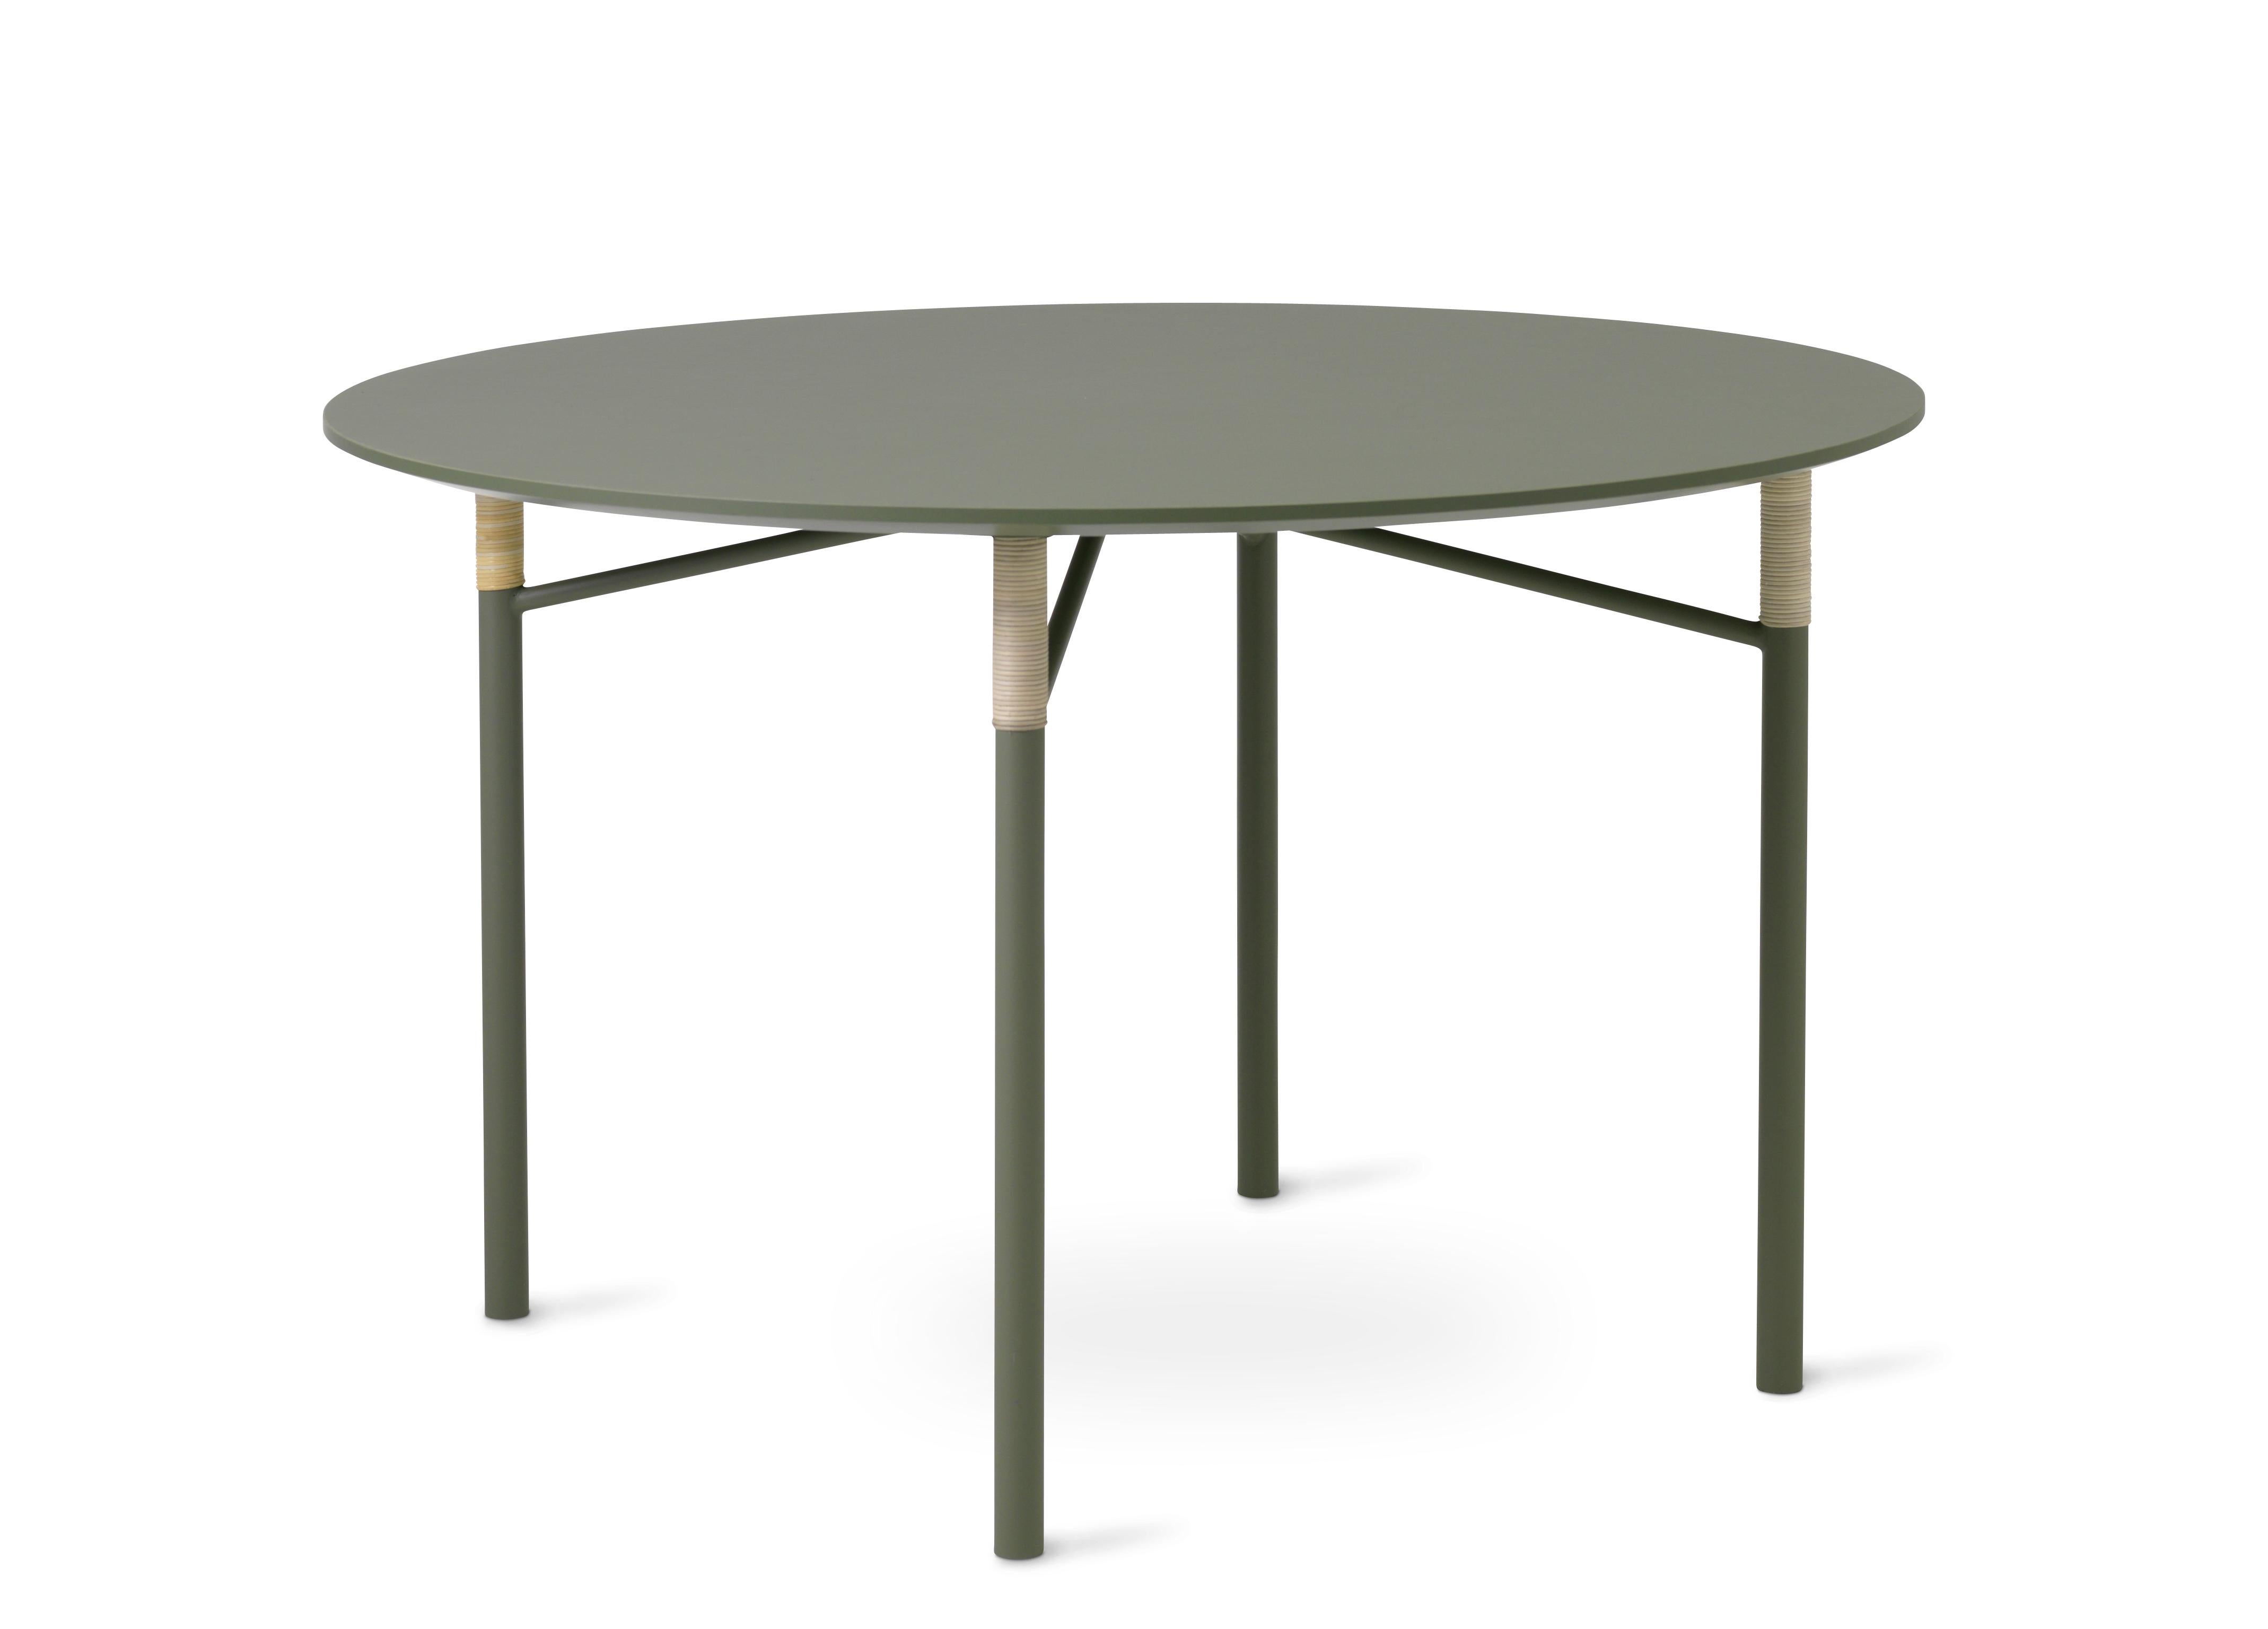 For Sale: Green (Light Green) Affinity Round Dining Table, by Halskov & Dalsgaard from Warm Nordic 2